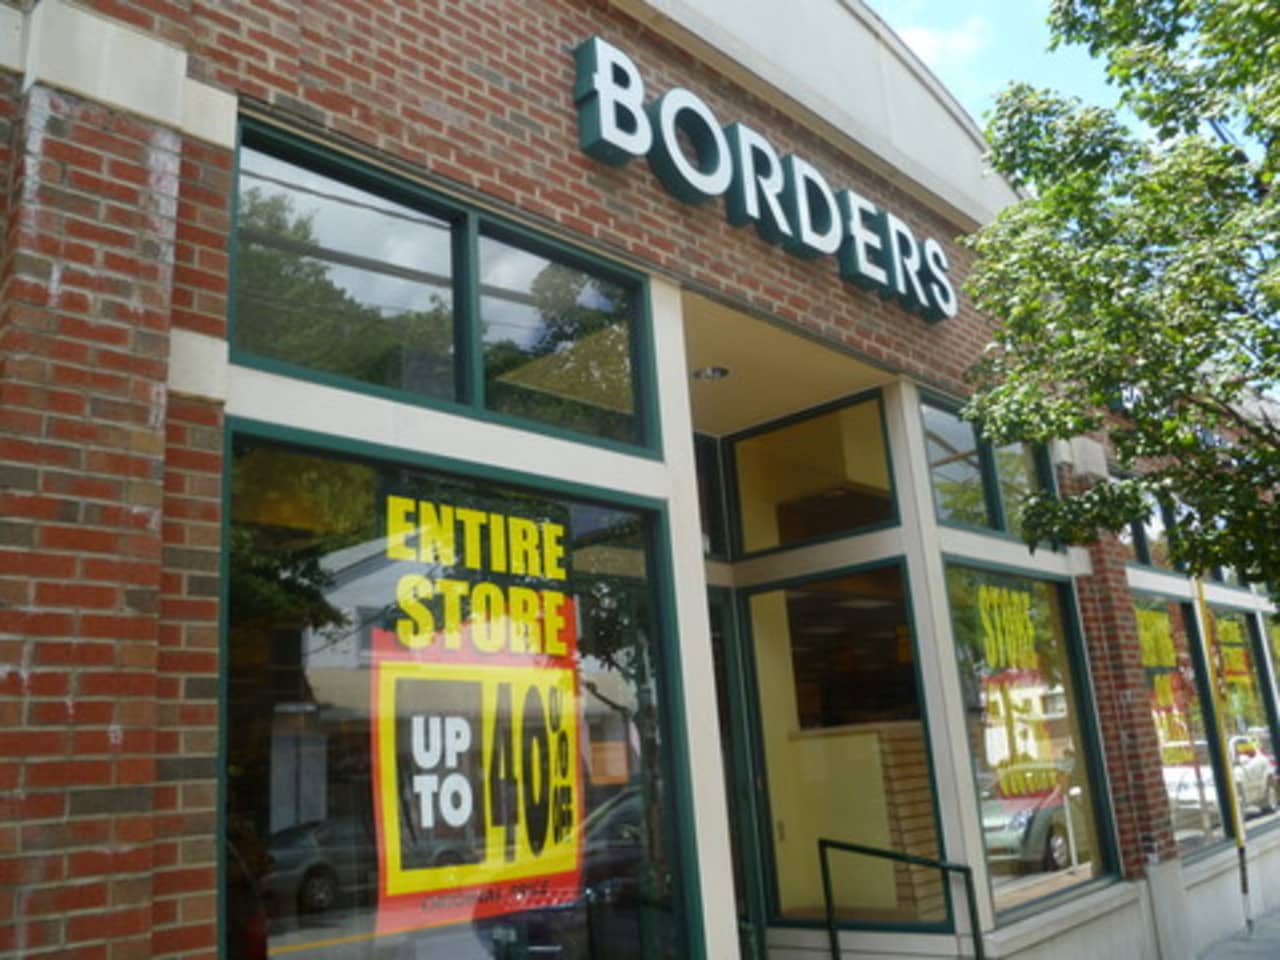 The Mount Kisco Borders liquidated its stock over the summer of 2011 and closed that September. Mount Kisco officials say a tenant now is interested in renting the space at Green and Main streets.